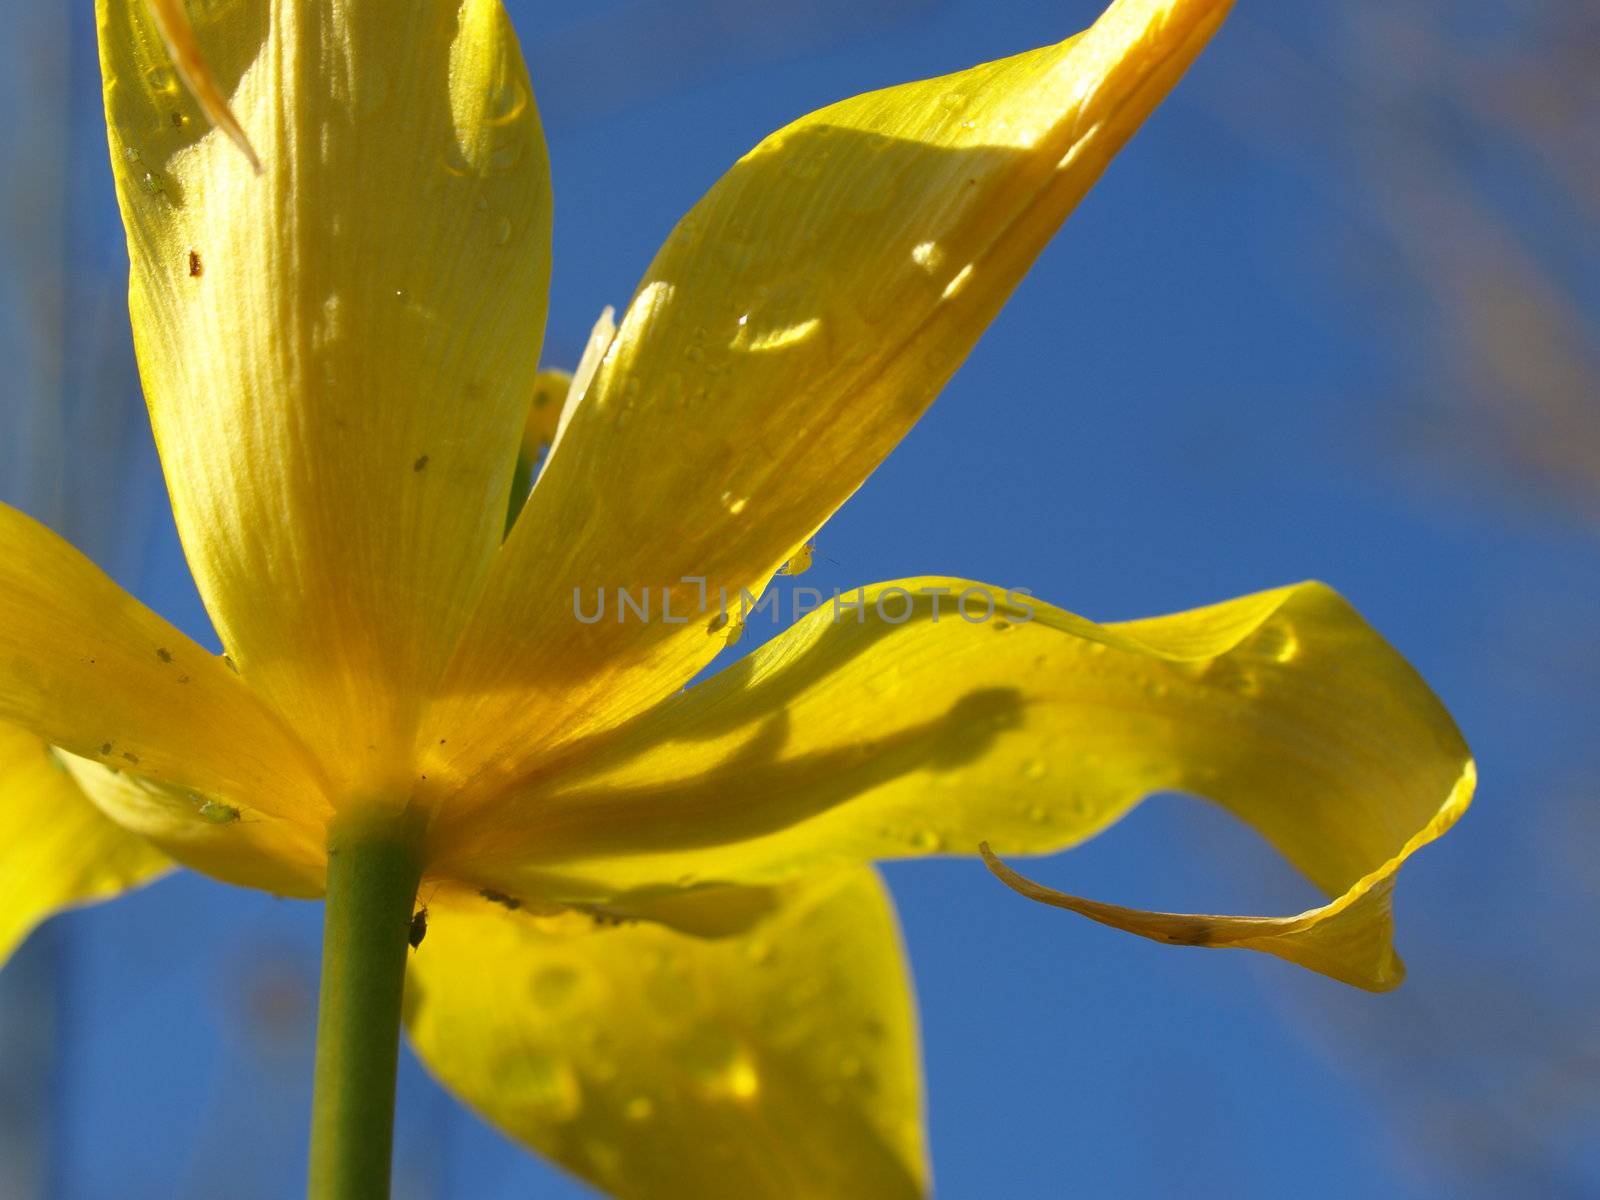 Underside of a yellow lilly with insect crawling on it